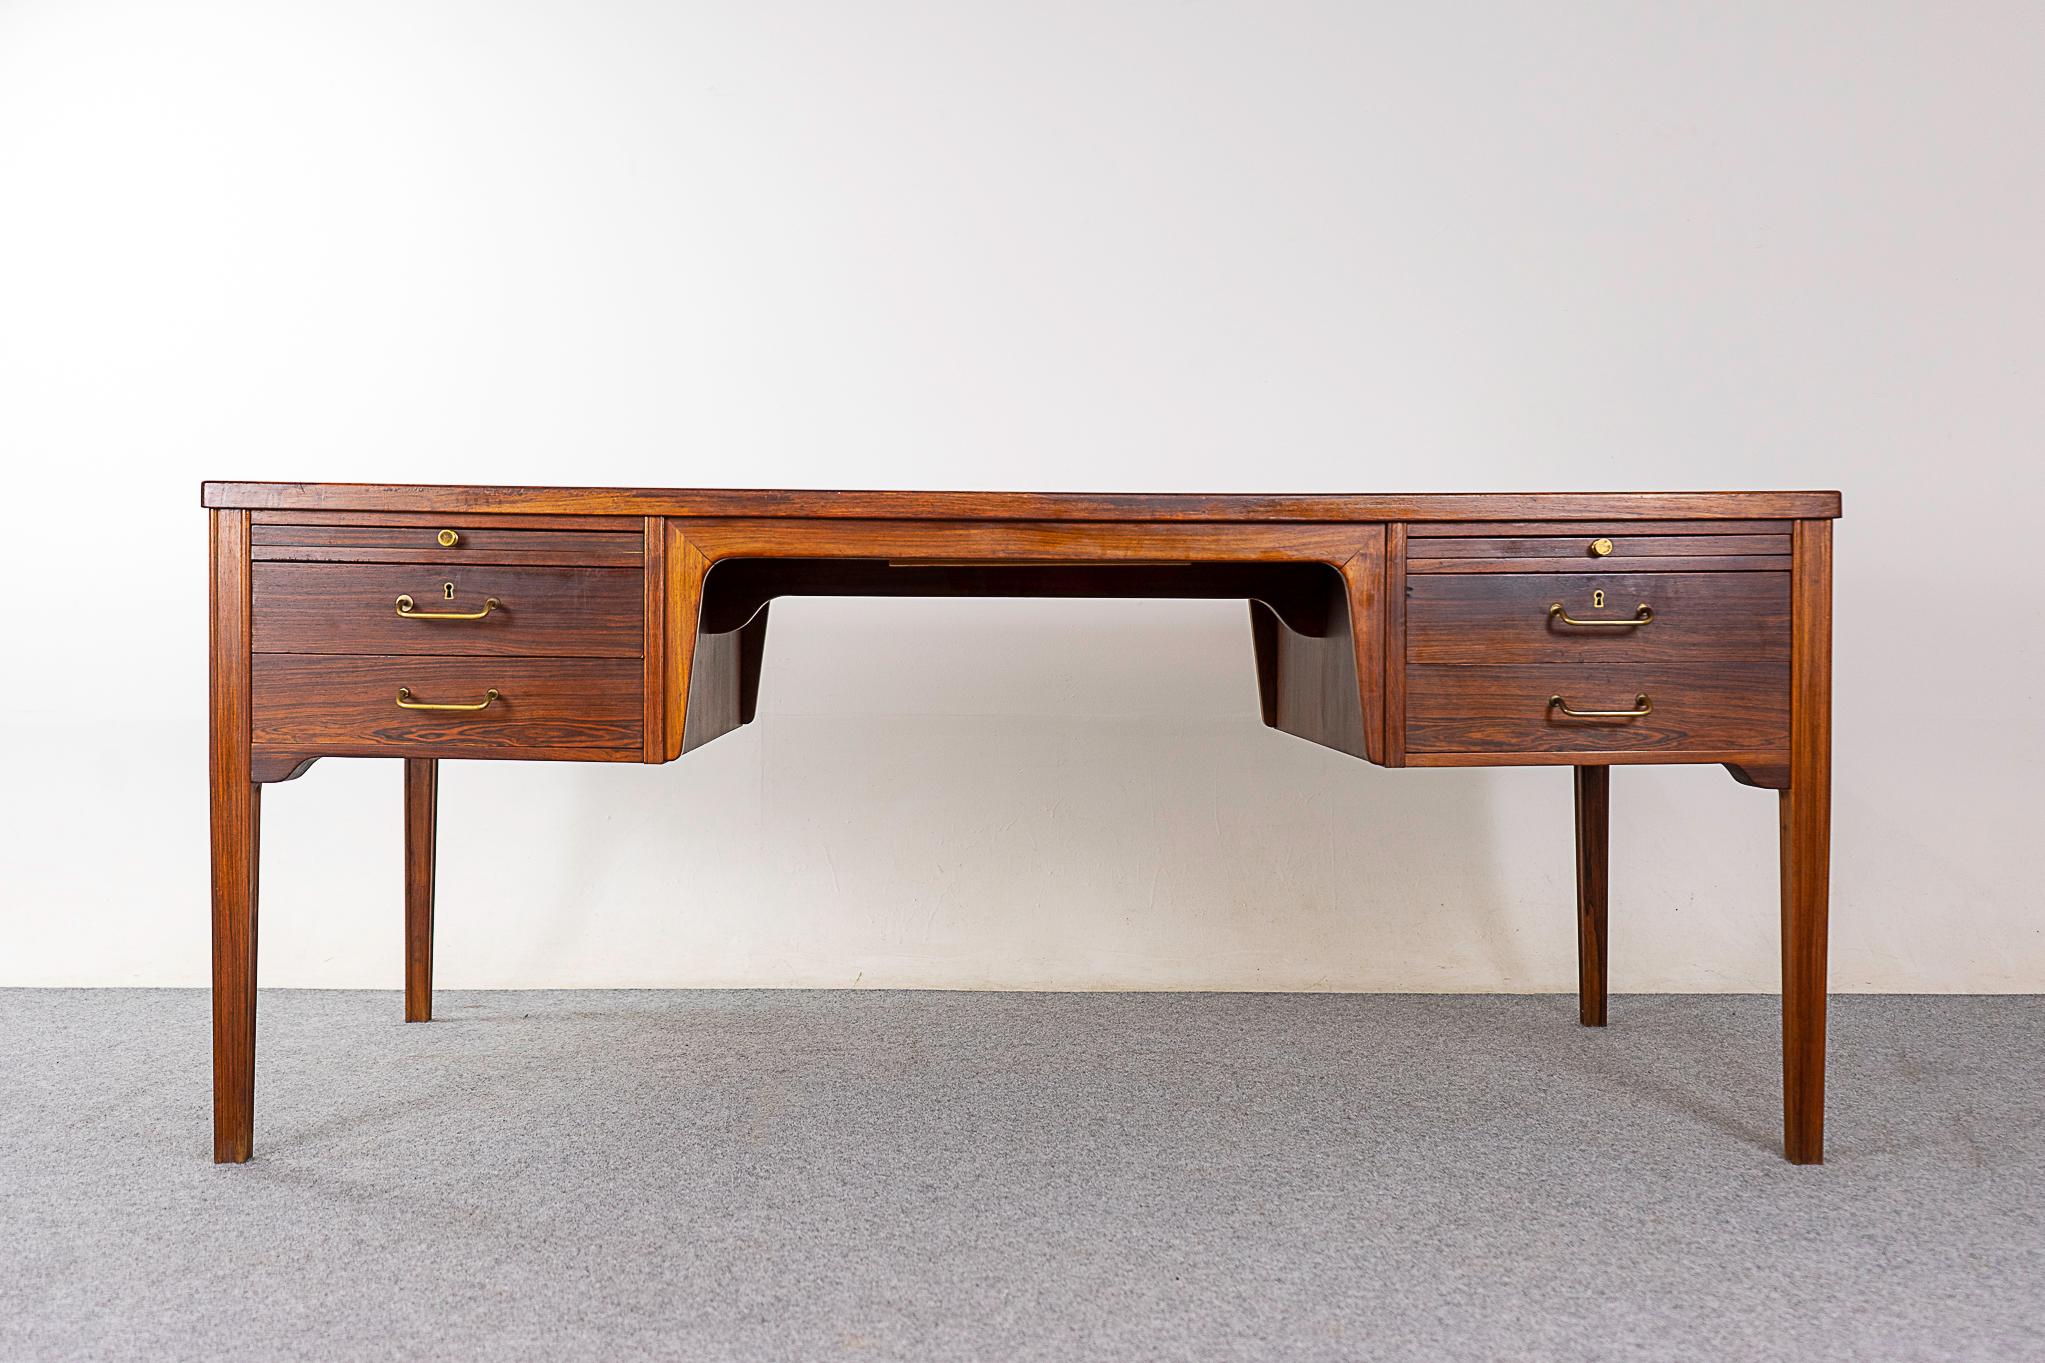 Rosewood mid-century desk, circa 1960's. Beautiful bookmatched veneer throughout, lovely brass details and lockable top drawers. Unique slide out back leaf adds extra surface area to the already generous top! Lovely arches in the knee opening. This